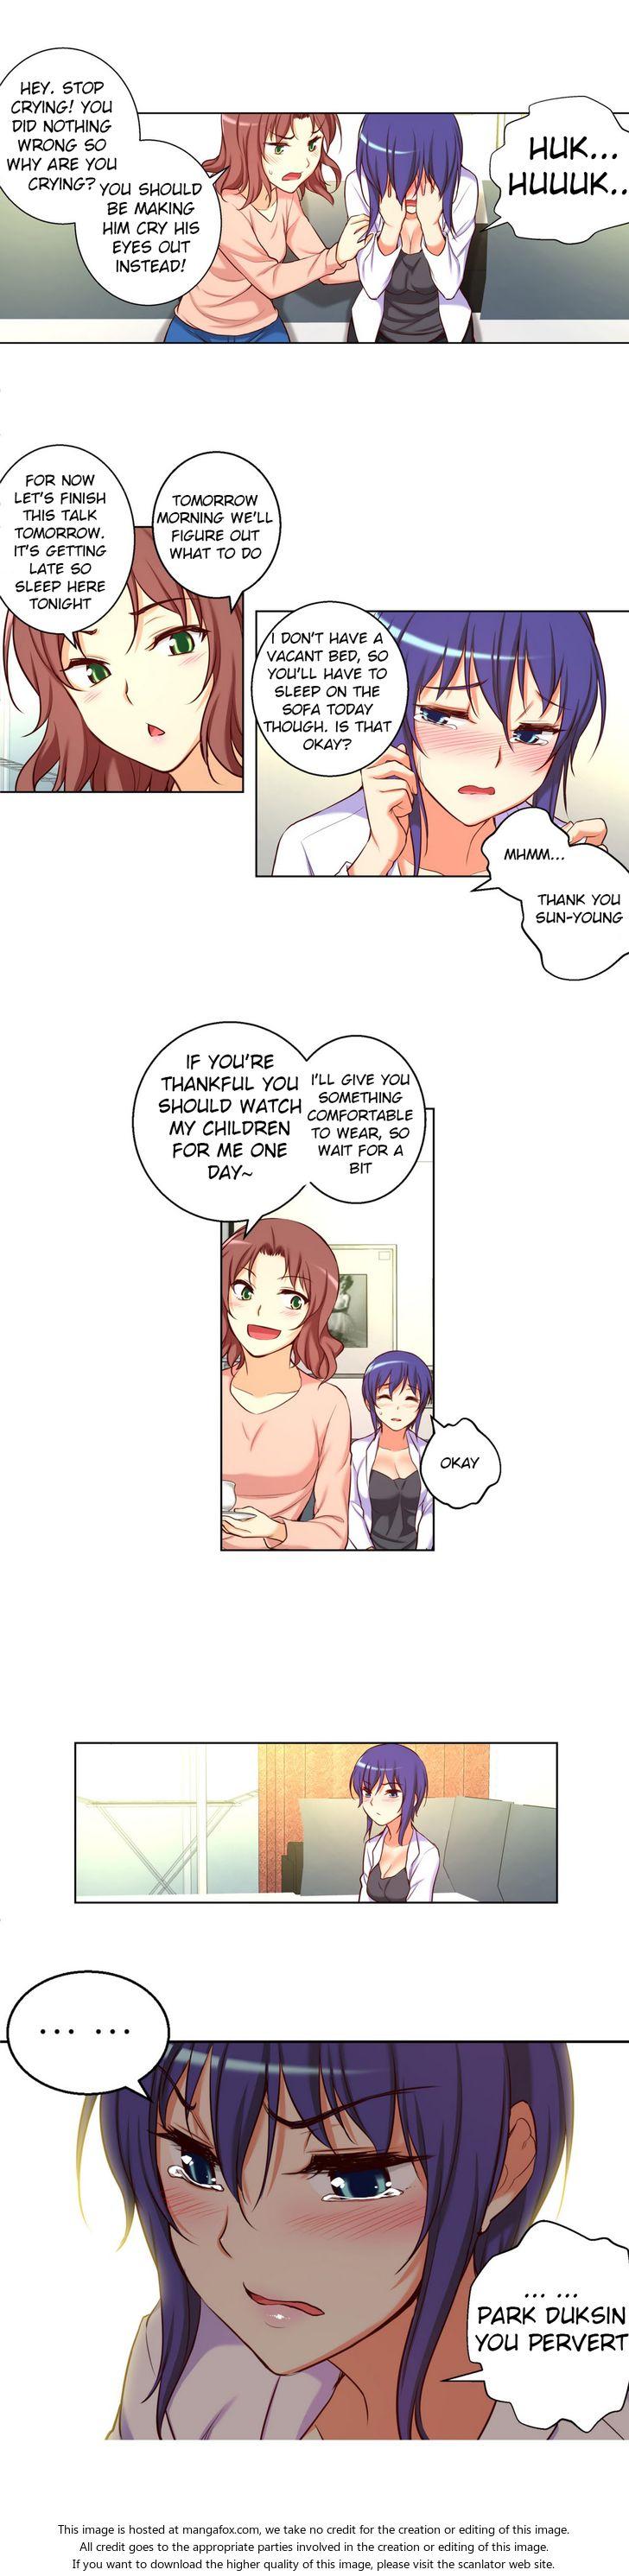 [Donggul Gom] She is Young (English) Part 1/2 340